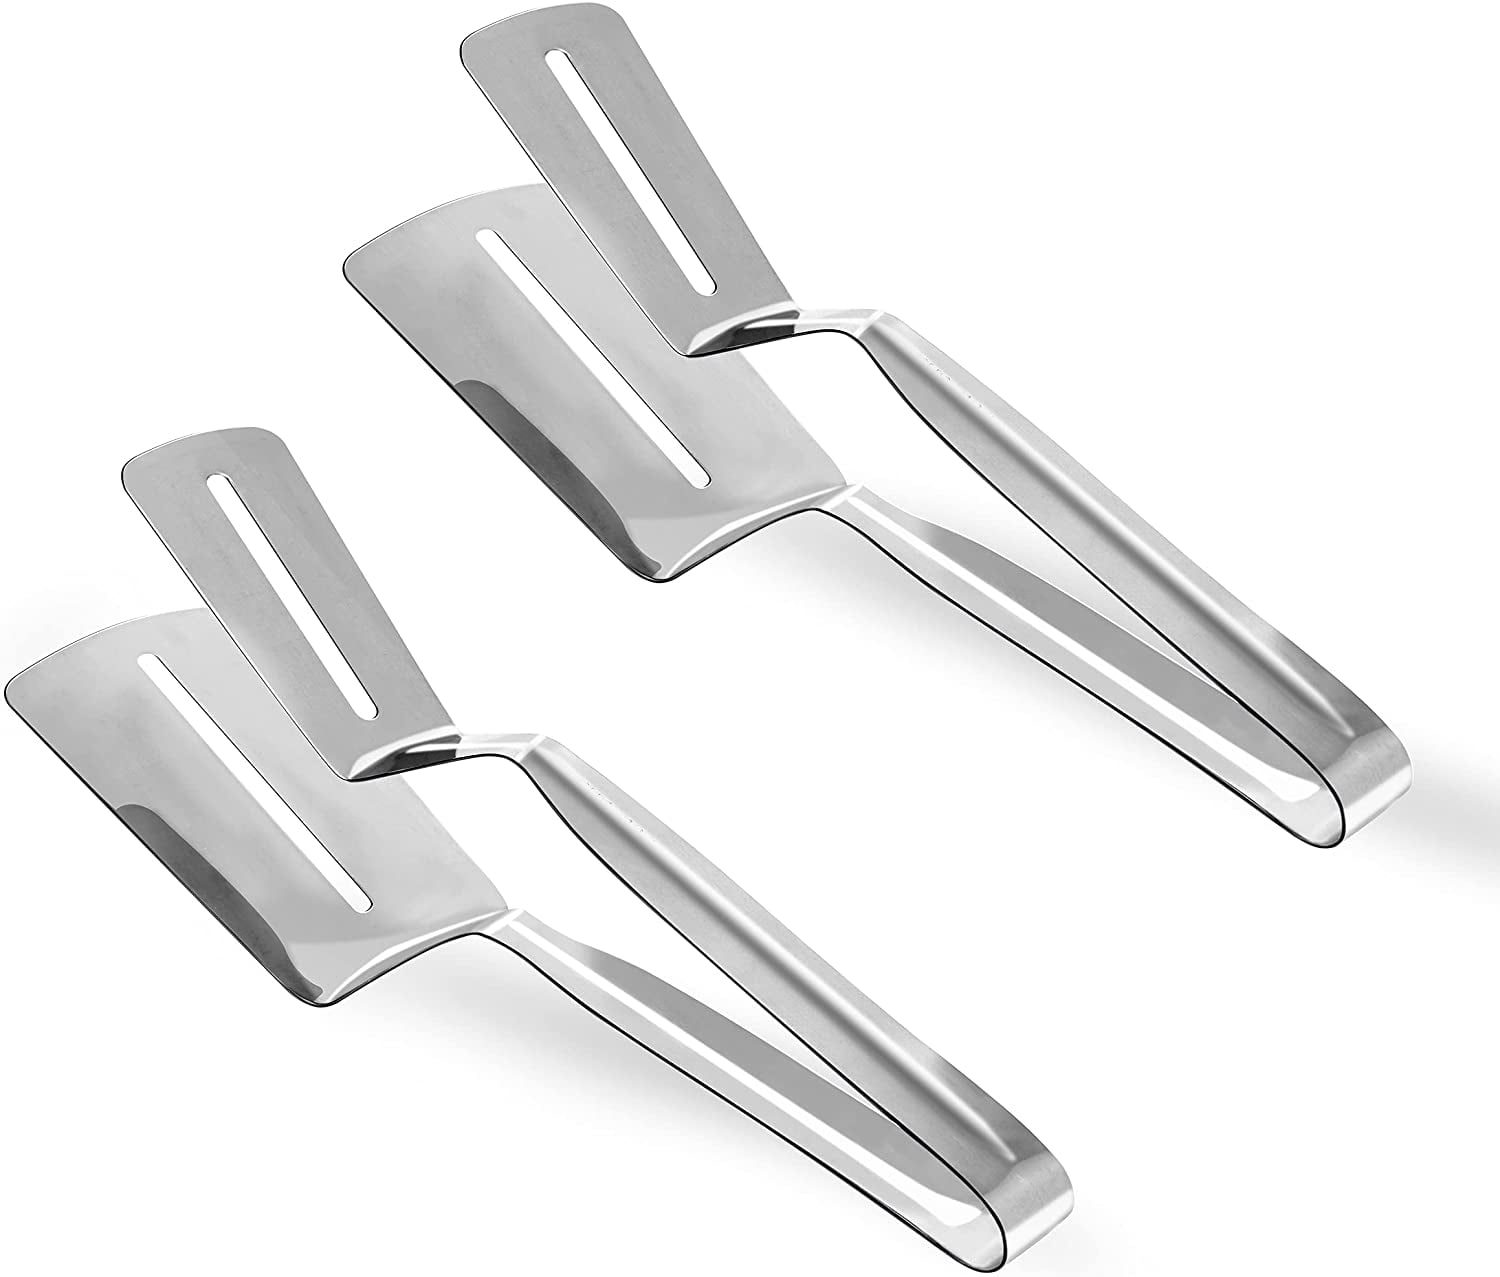 Double Sided Spatula,Tongs for Cooking 10 inch Stainless Steel,Fishing turner. 